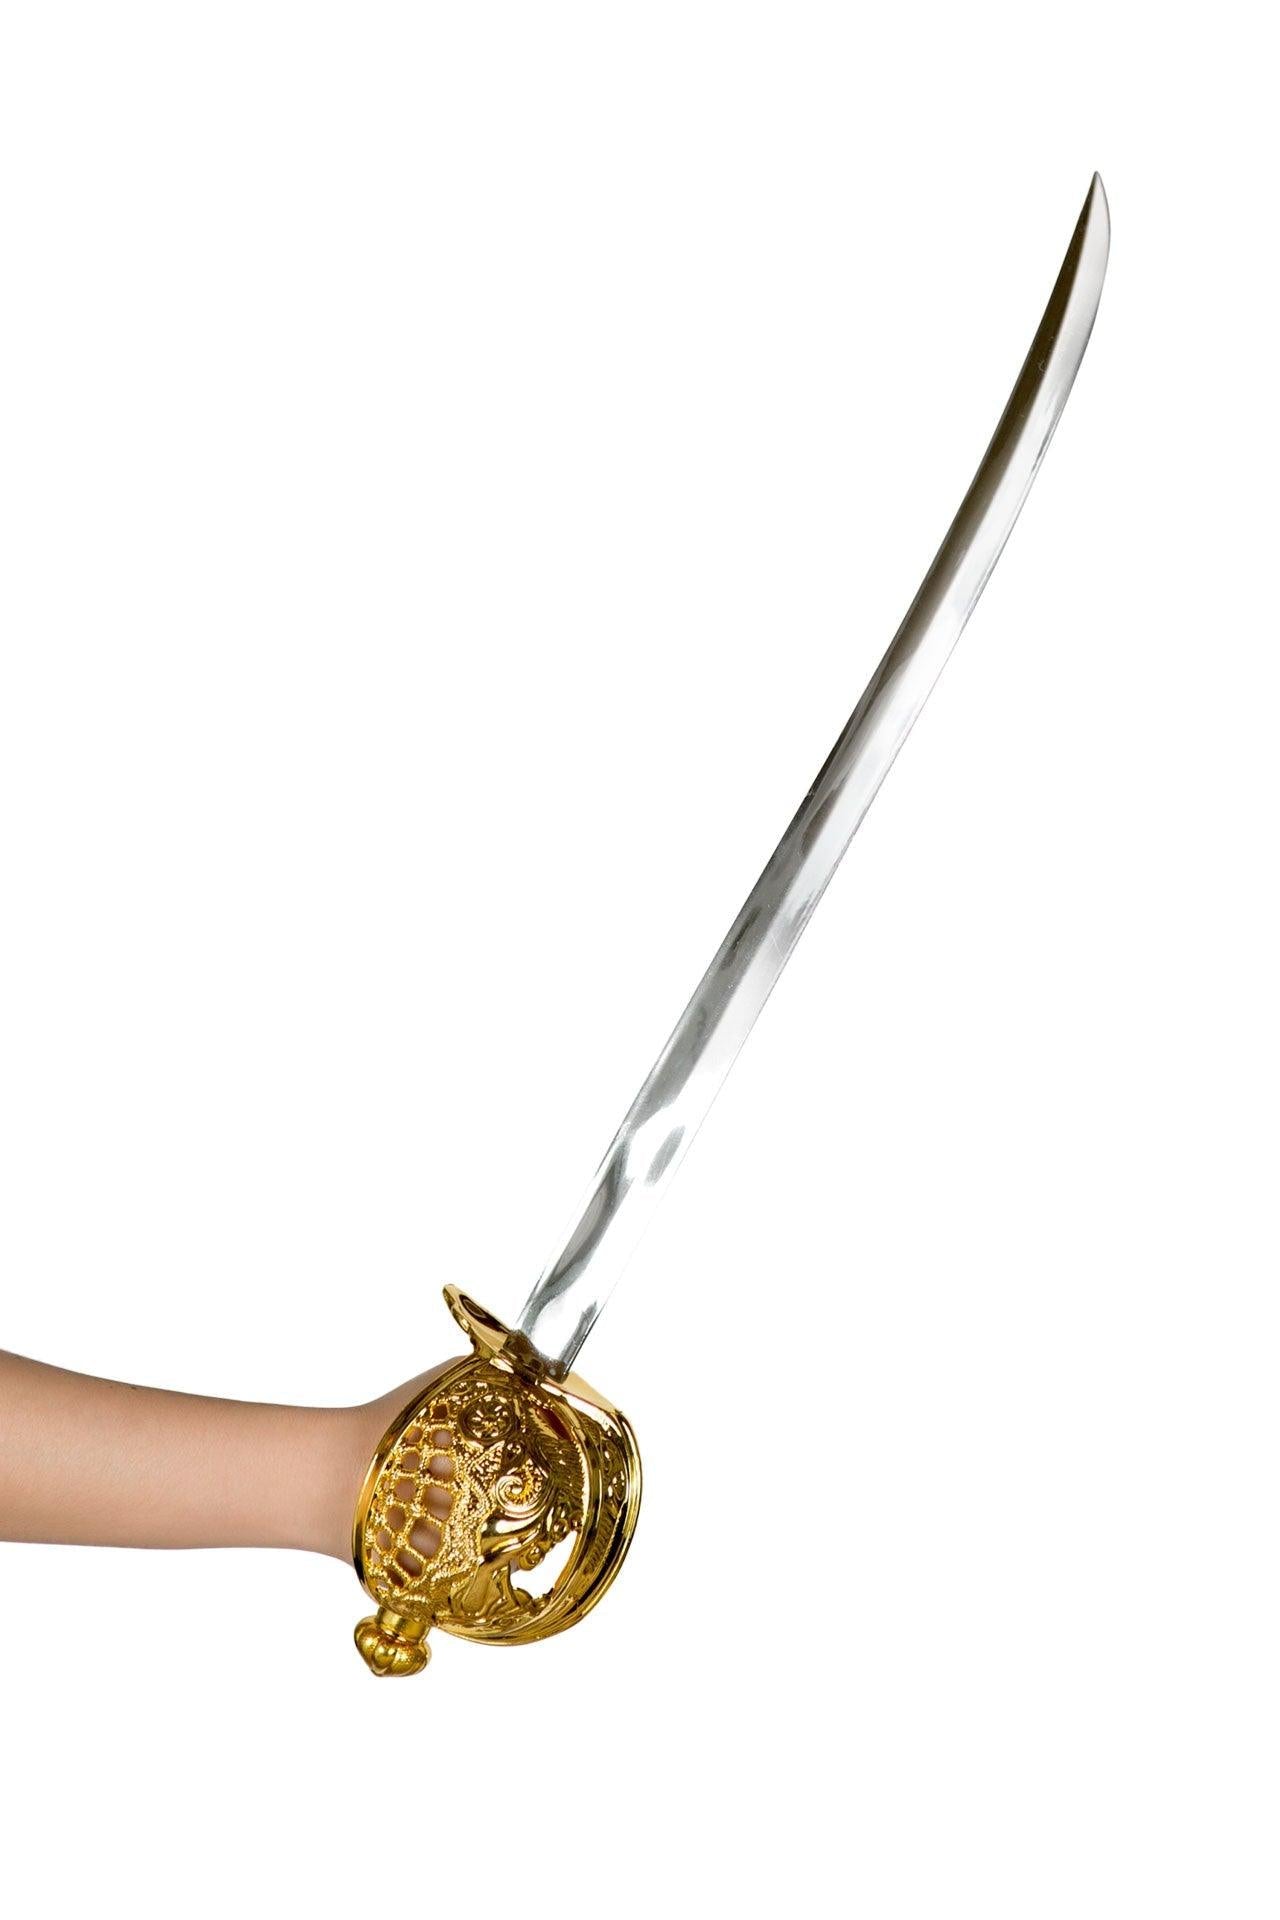 4693 - 25” Pirate Sword with Round Handle - AMIClubwear